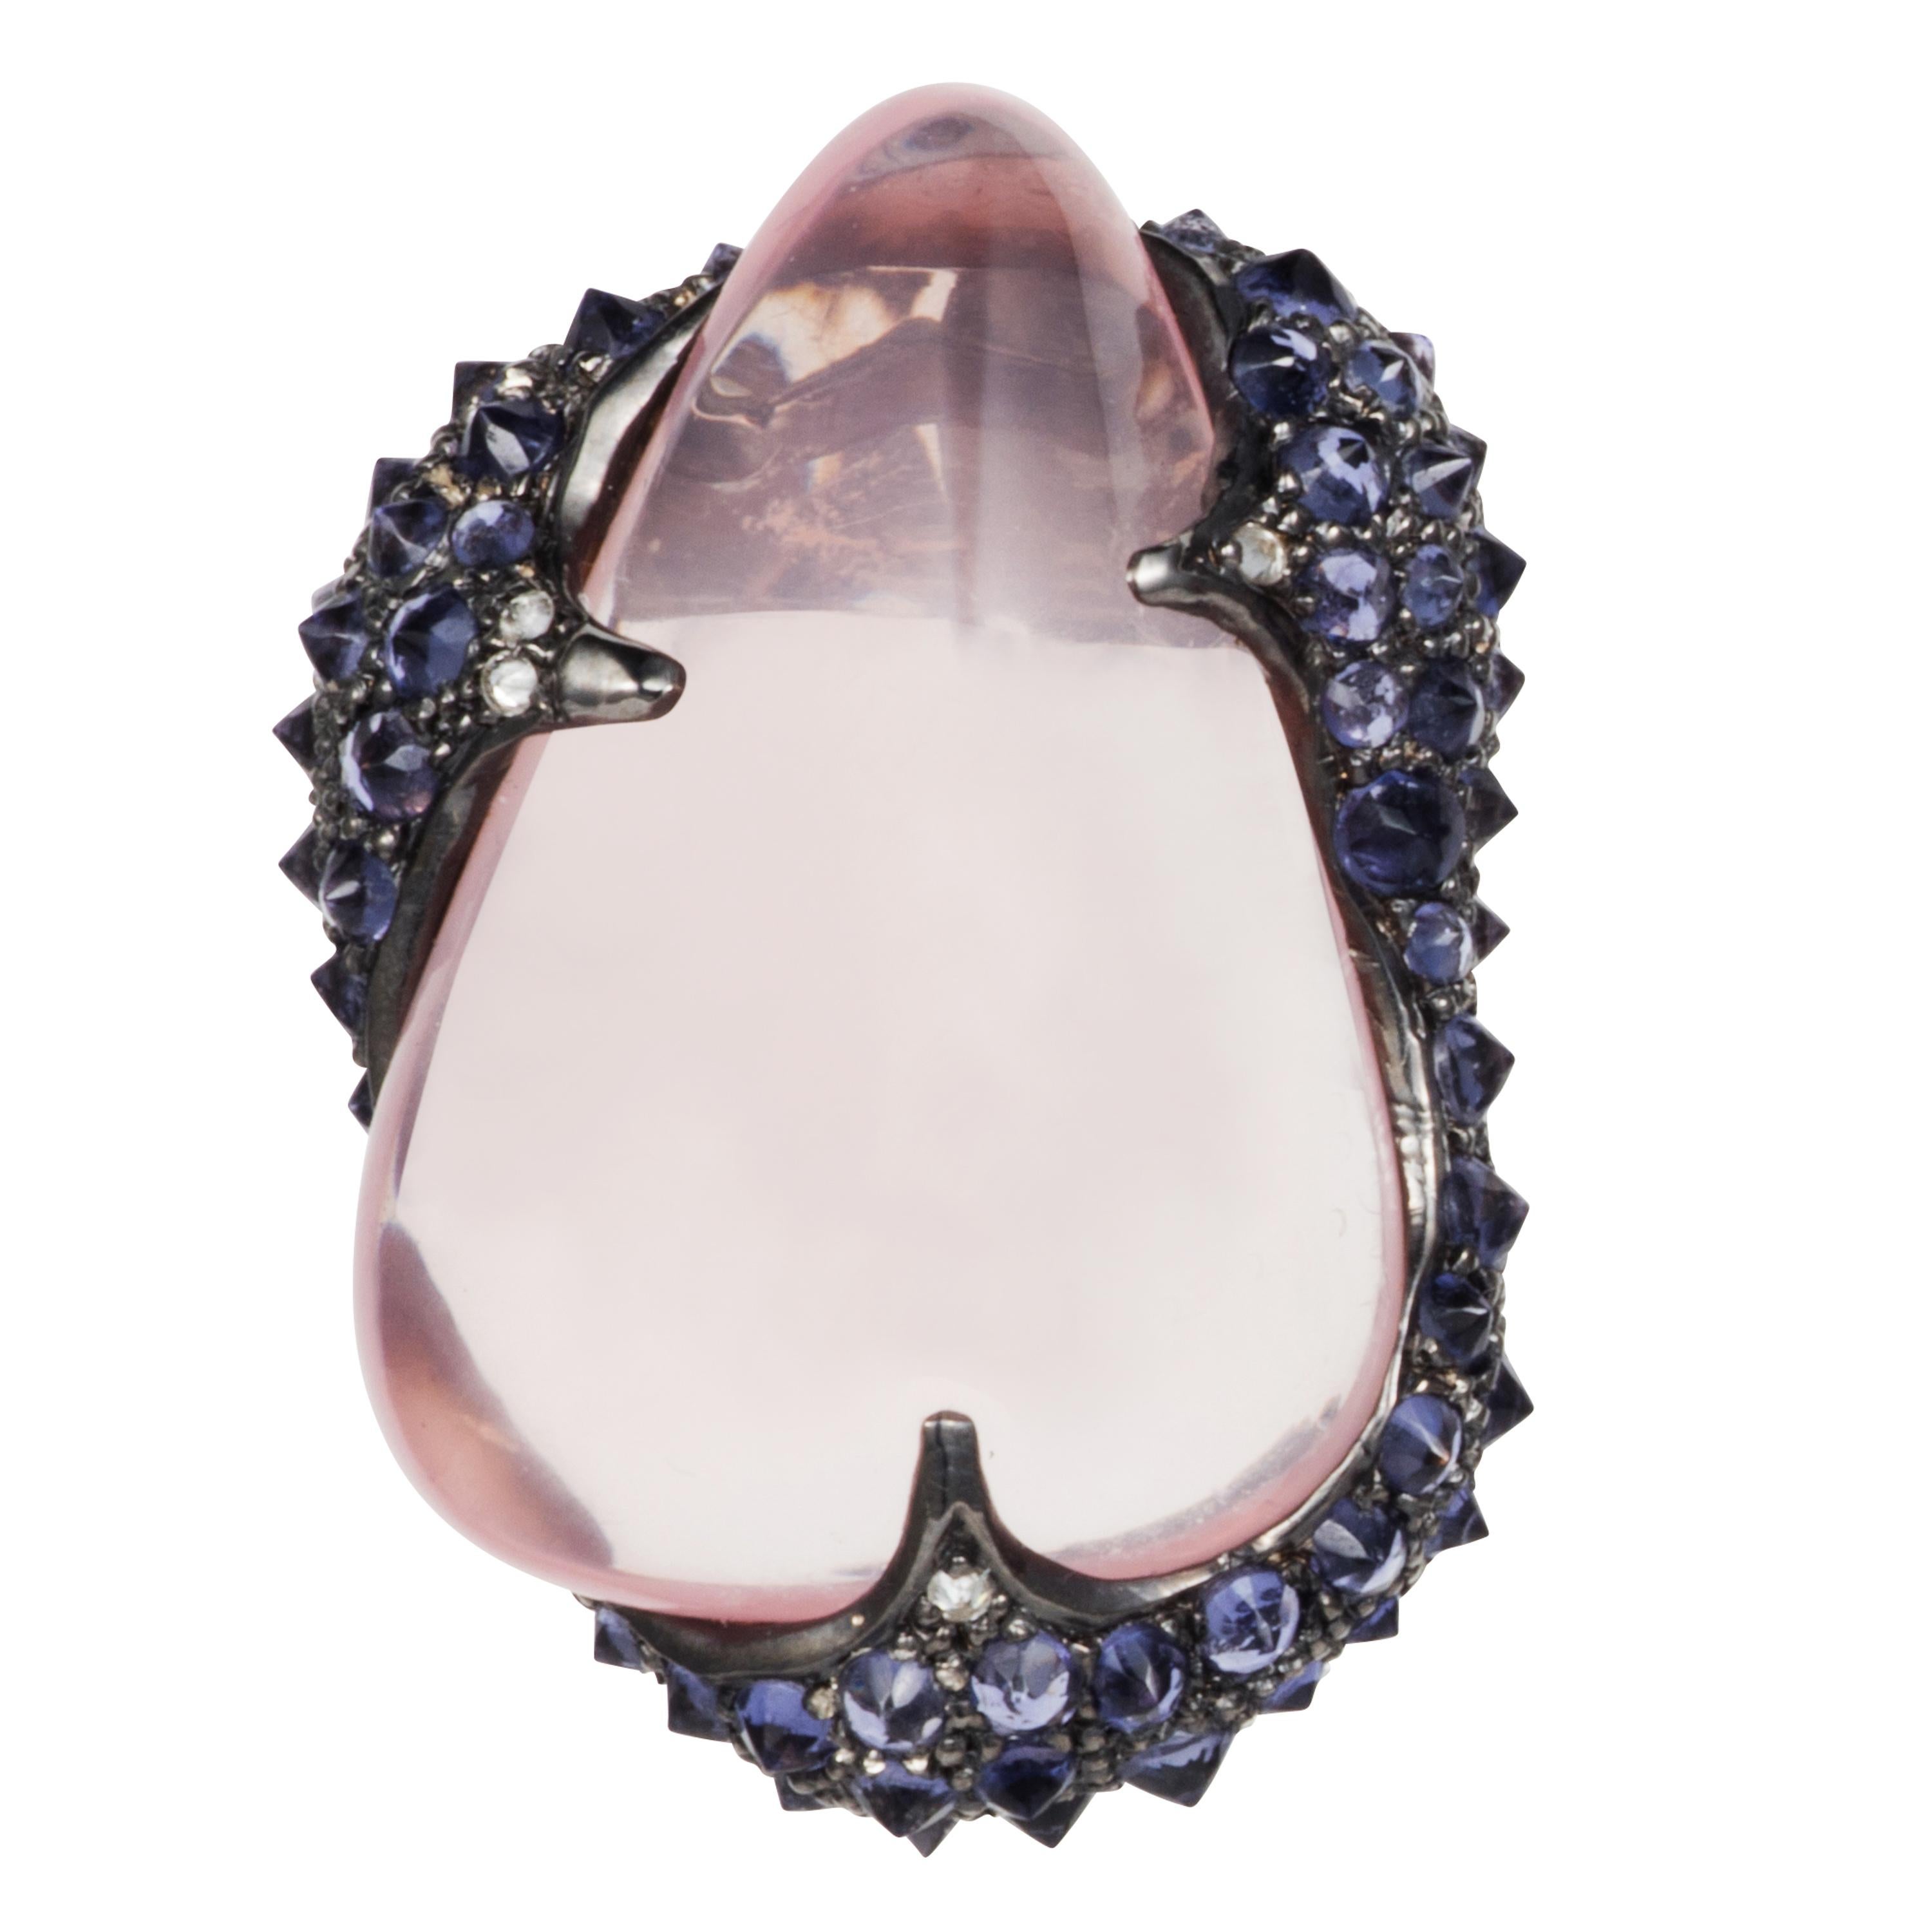 Gross weight: 24.4 grams
Gold: 3 grams 
Rose Quartz: 63.250 carats
Iolites: 4.25 carats
Diamonds: 0.09 carats 

Made to order and available in other precious stones.  Matching statement ring also available.

Translucent delicate pink  ‘tumbled’